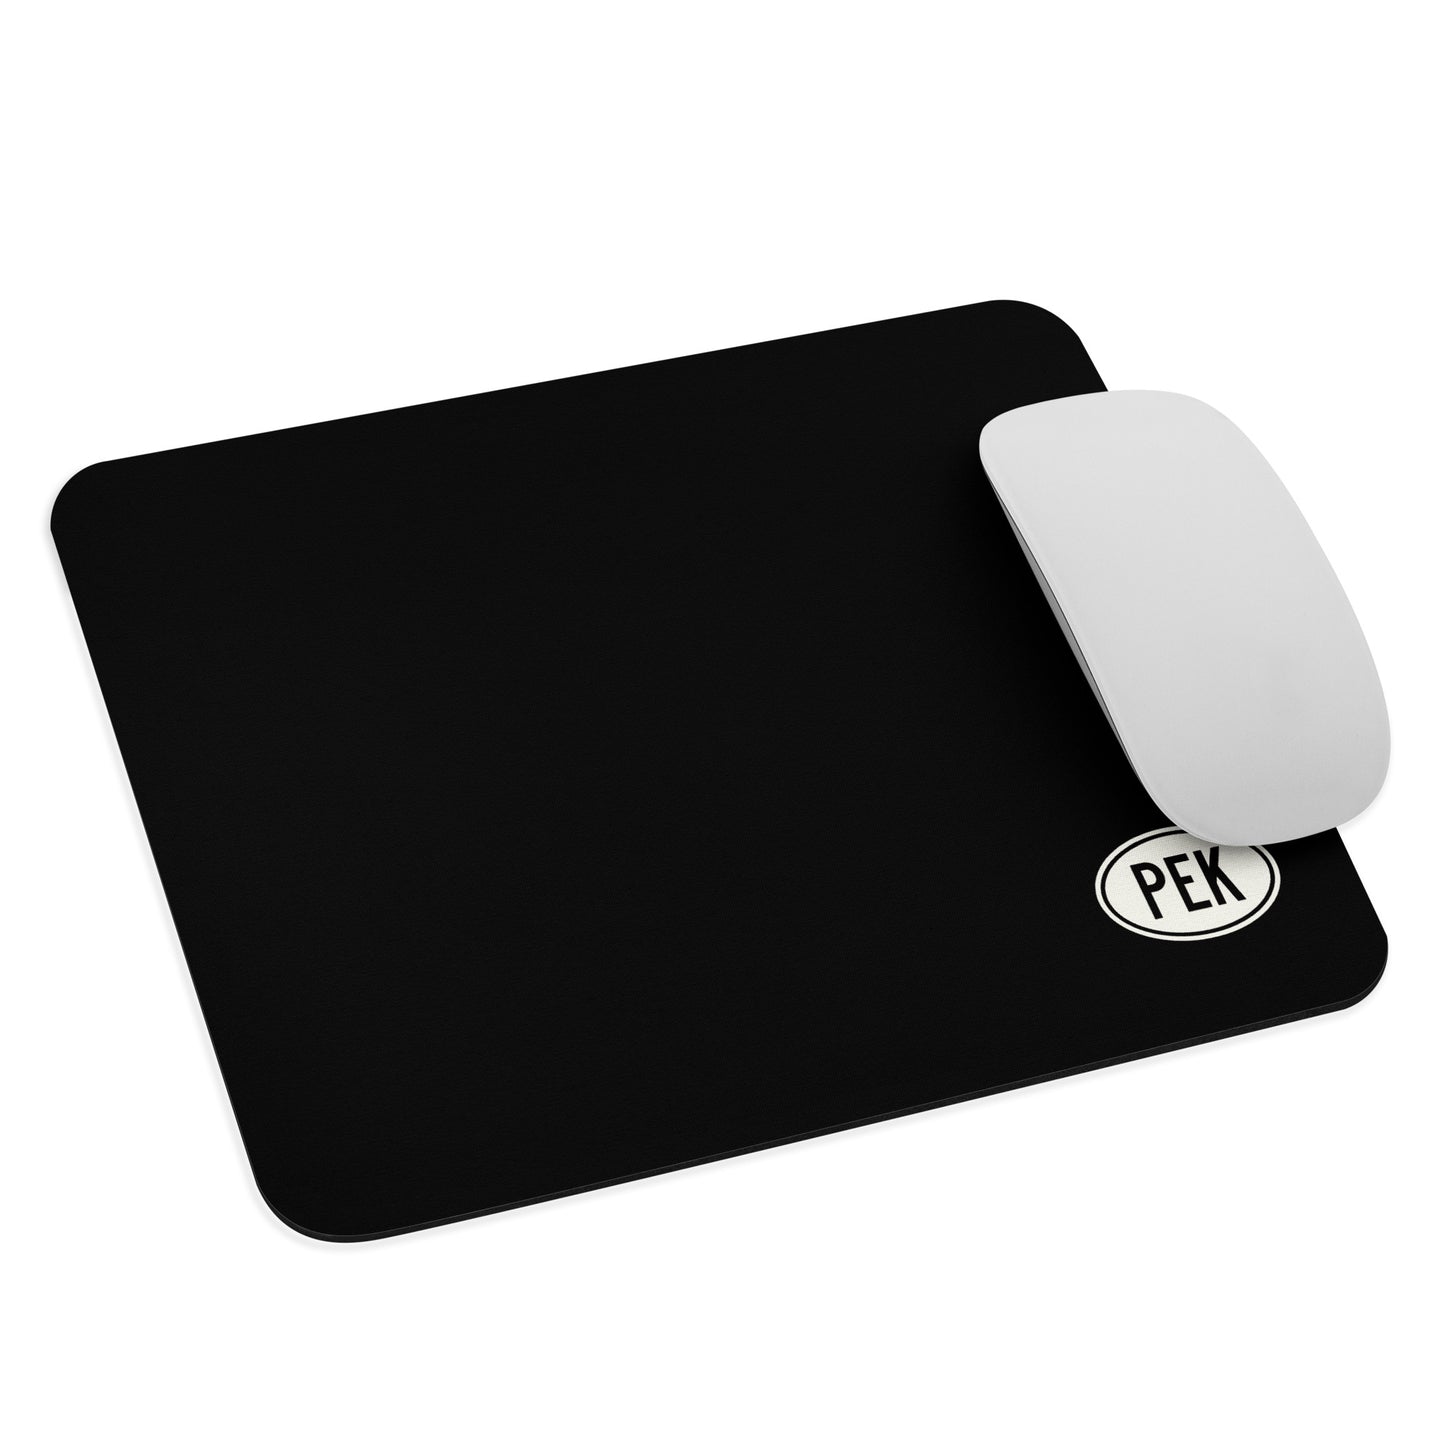 Unique Travel Gift Mouse Pad - White Oval • PEK Beijing • YHM Designs - Image 03